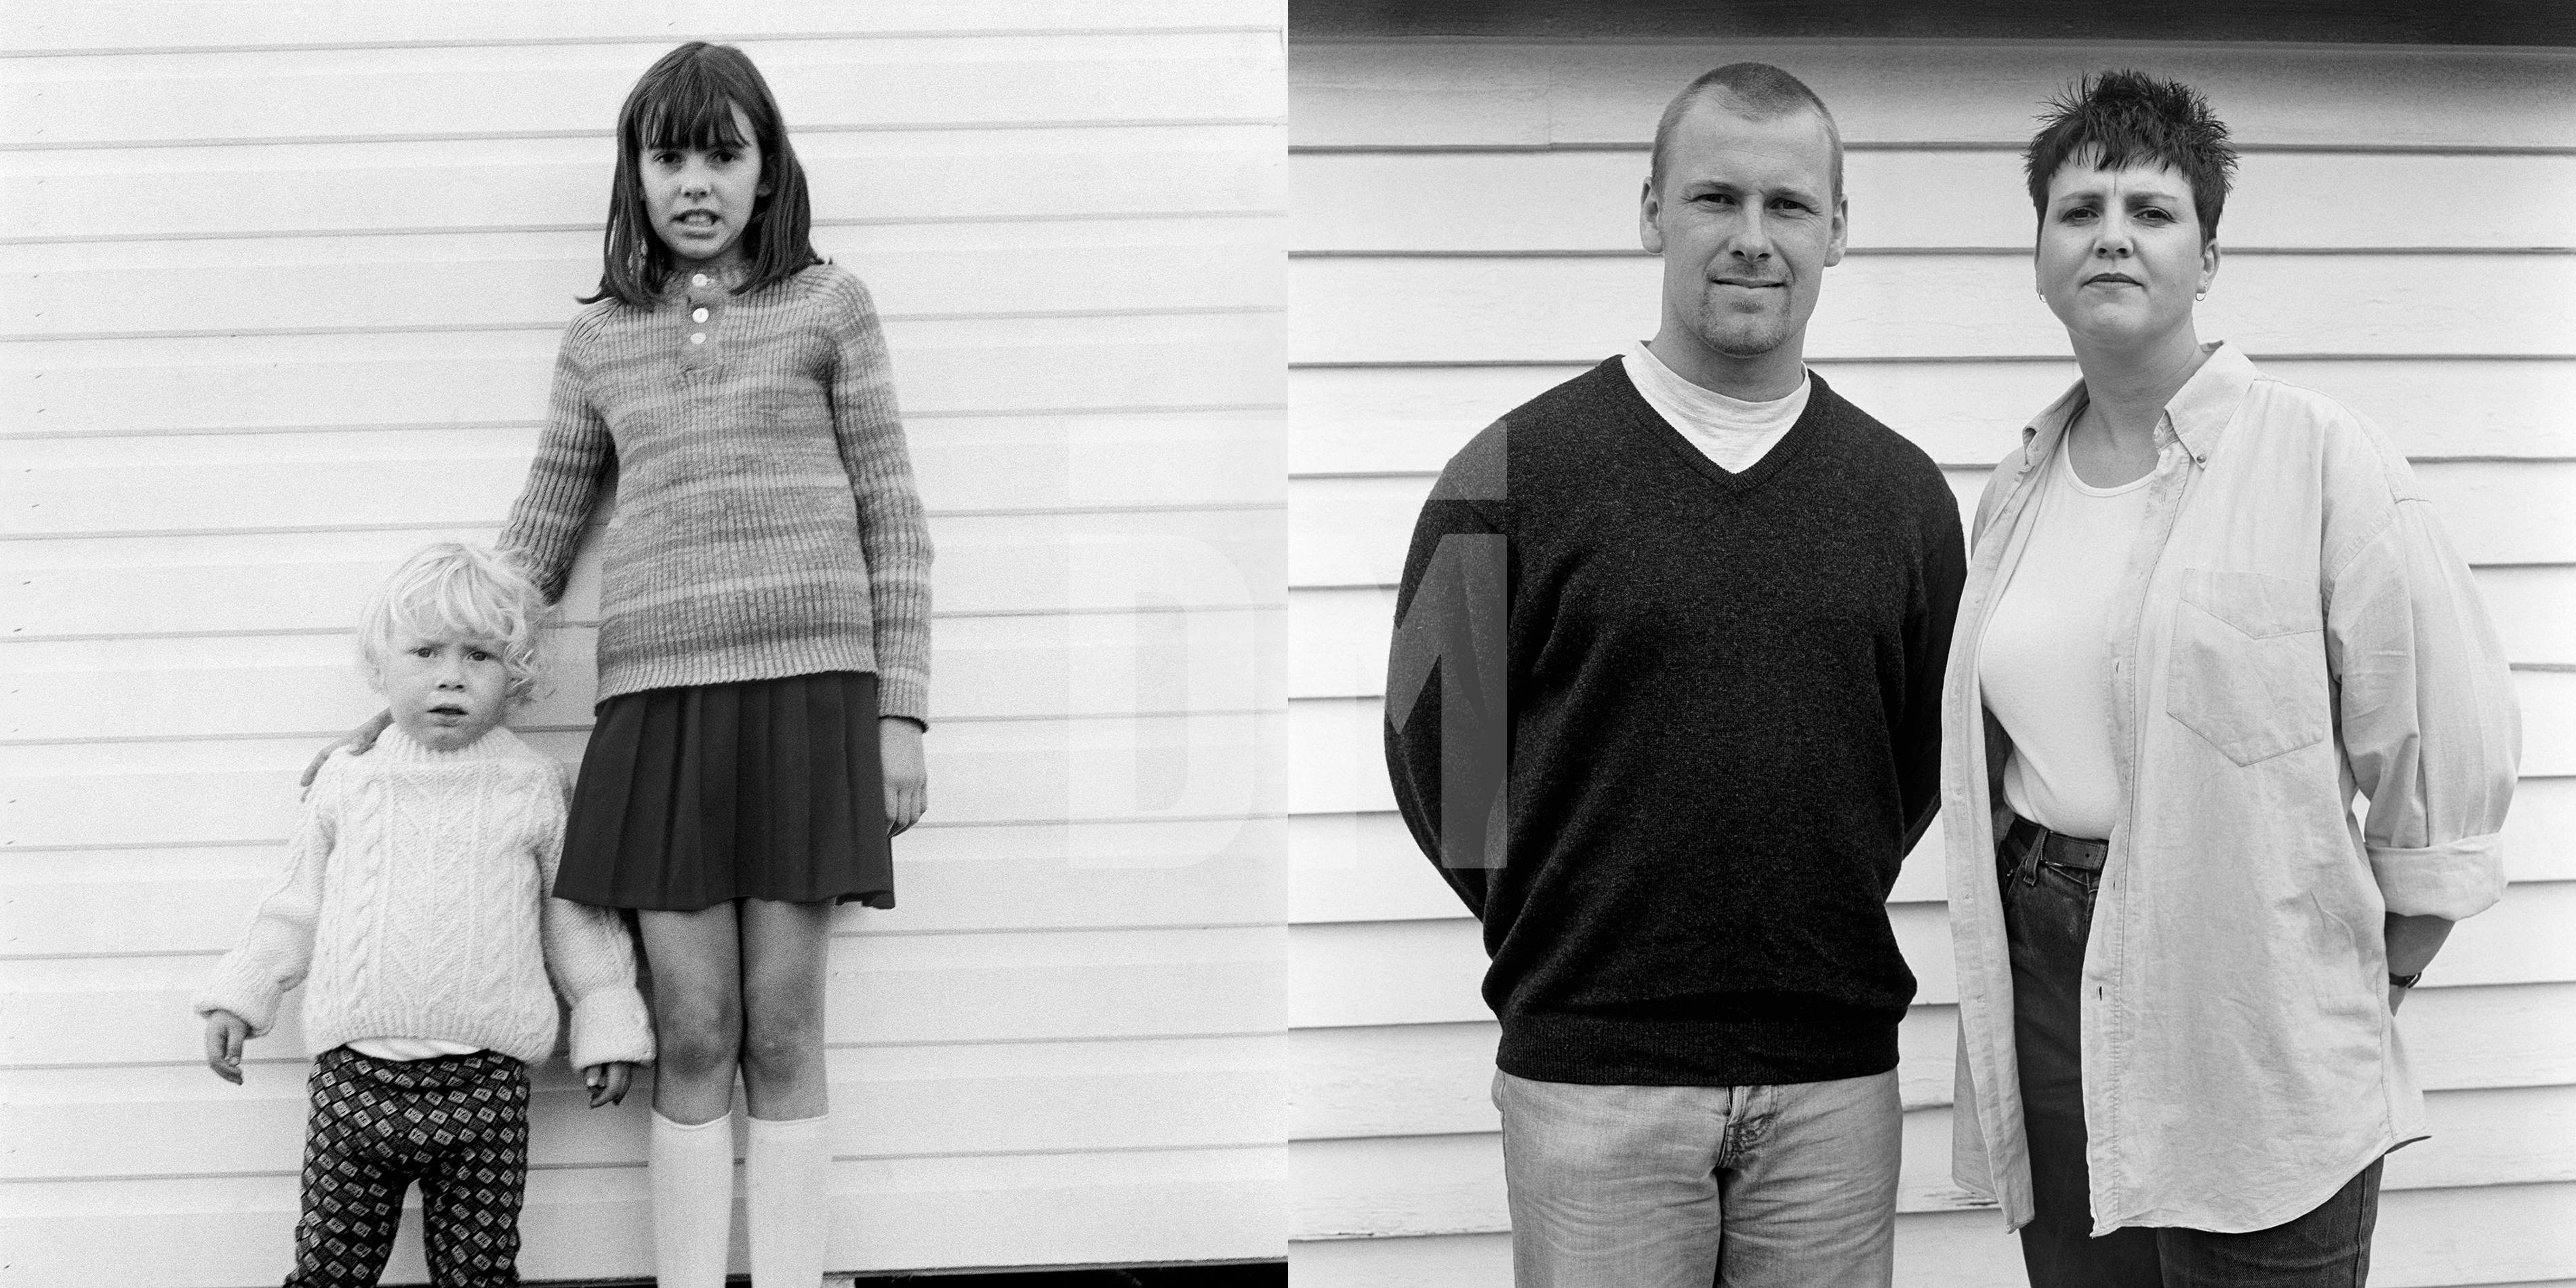 Brother and sister: Martin and Debbie Pout. Hartlepool, Cleveland and Marden, Kent. 1974 and 1998 by Daniel Meadows